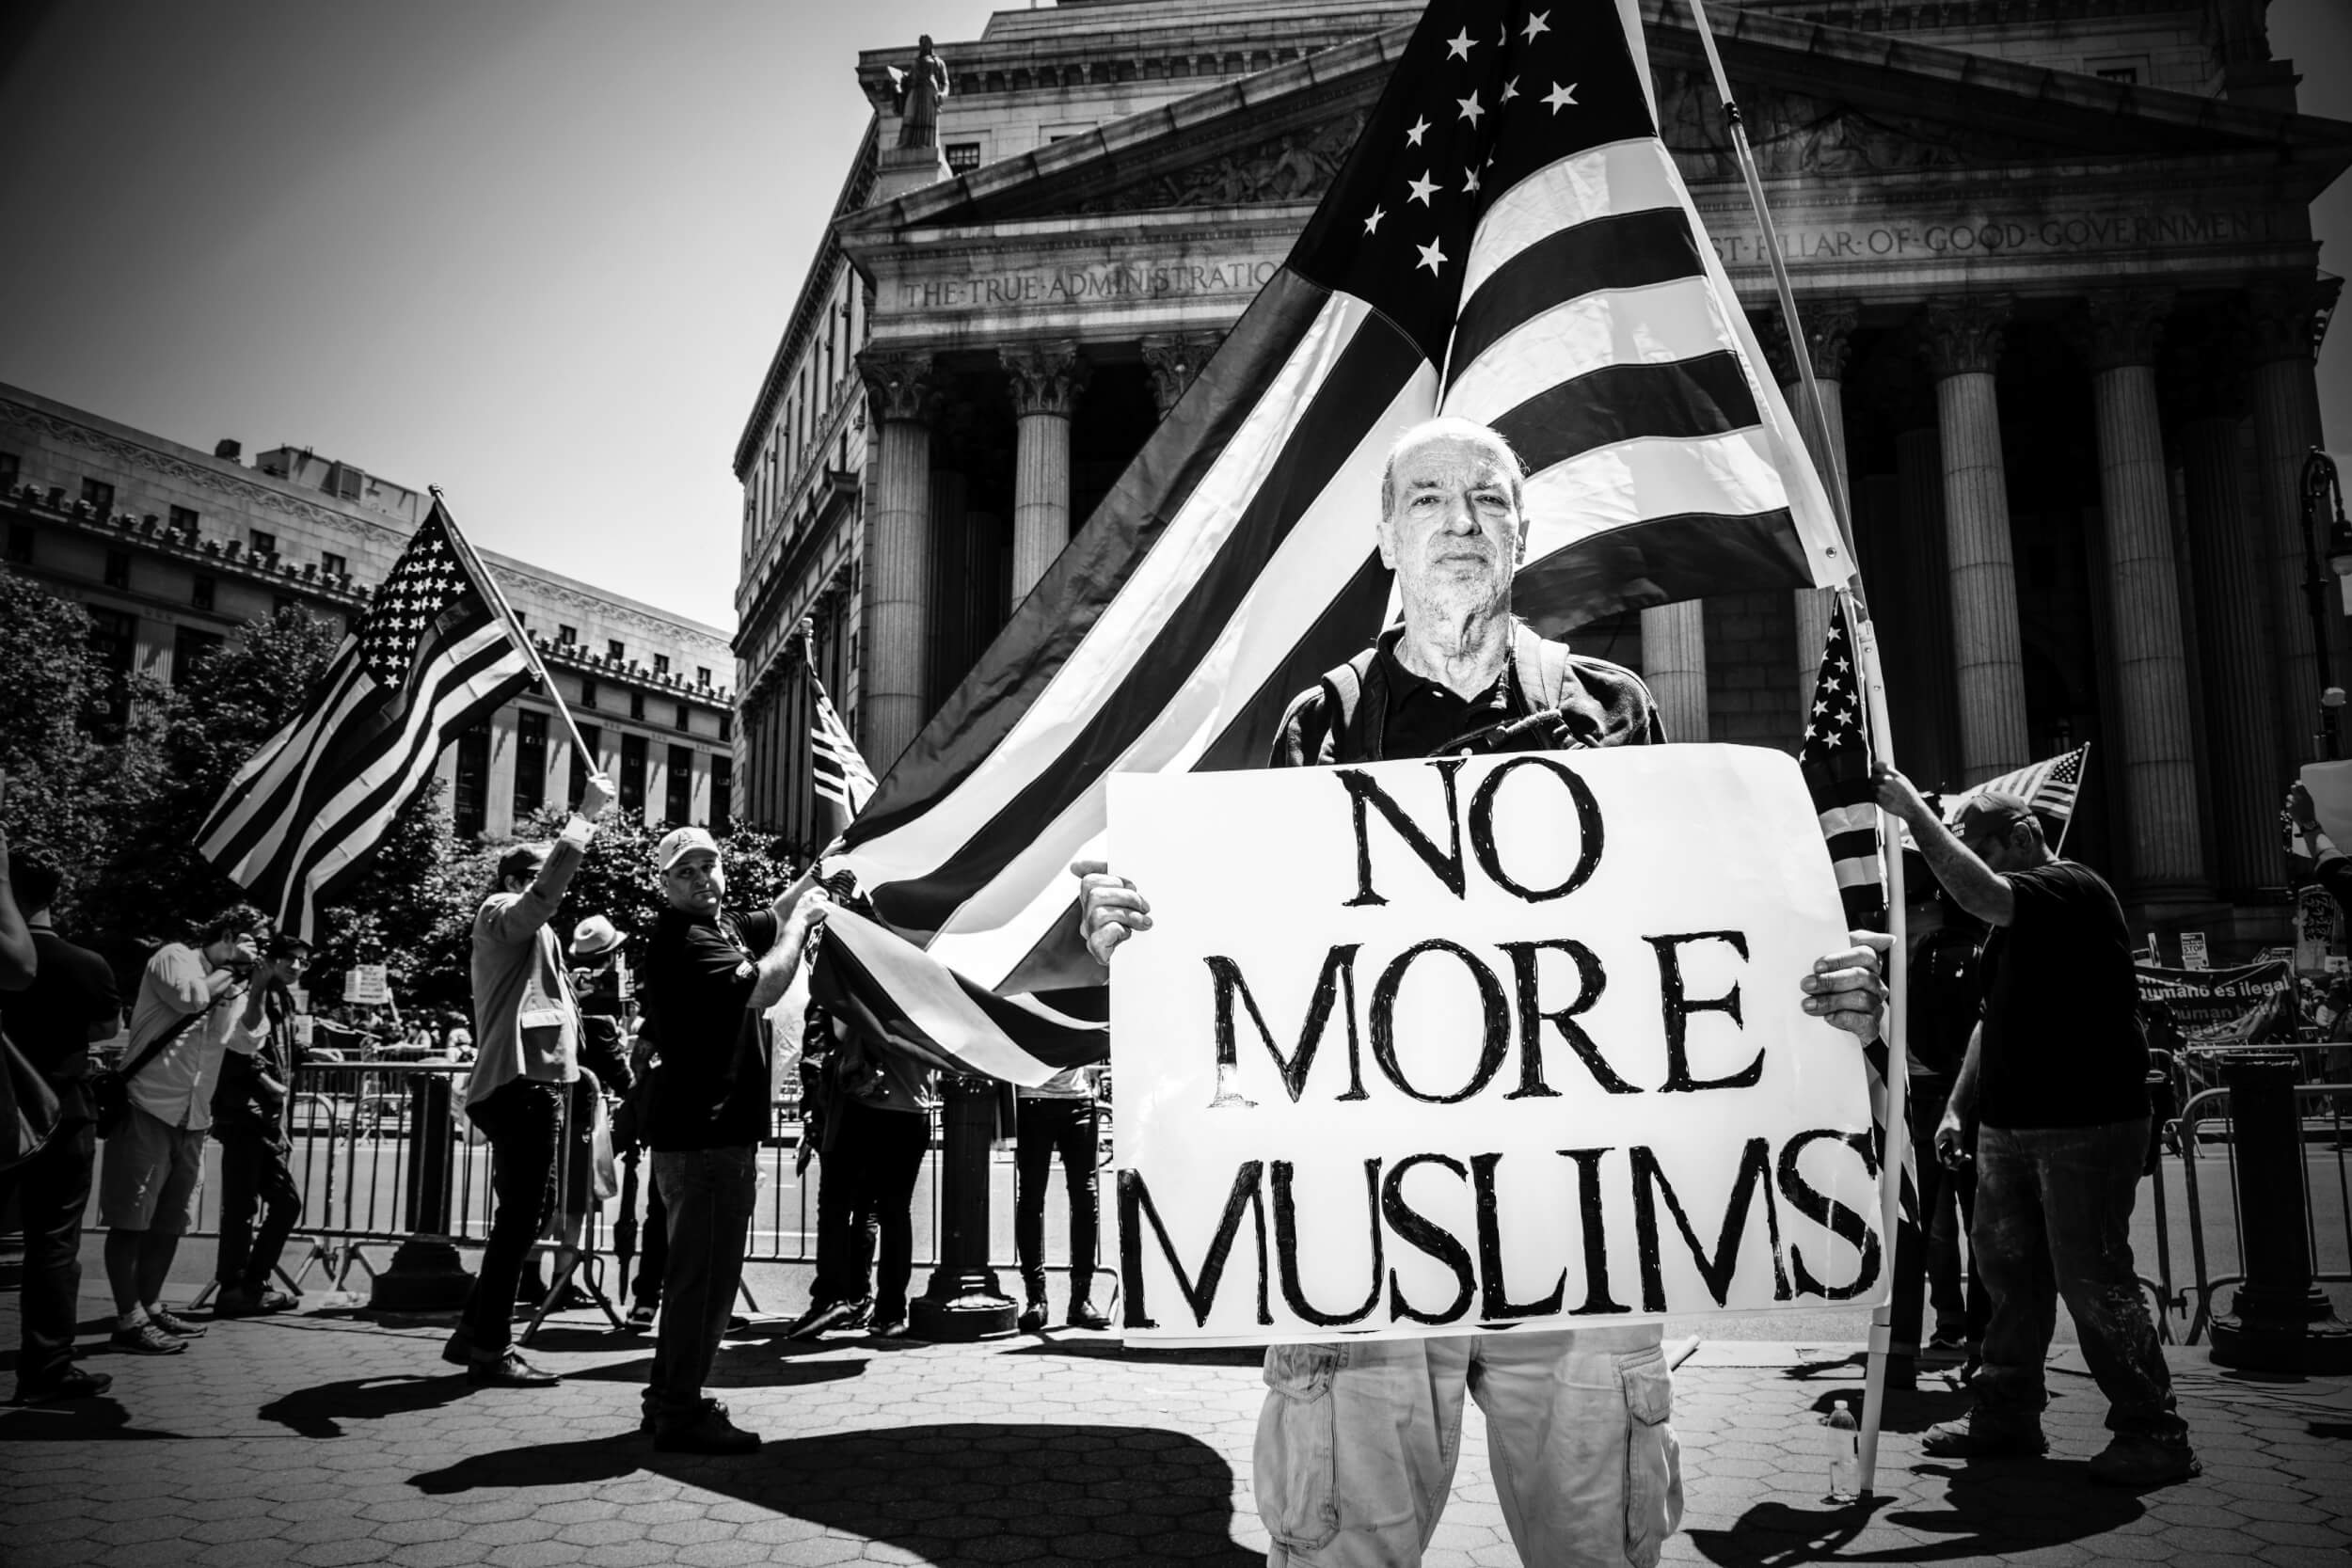 Protest against Islam at Foley Square in New York City, June 10, 2017. (Photo: Mark Peterson. markpetersonpixs @ Instagram)